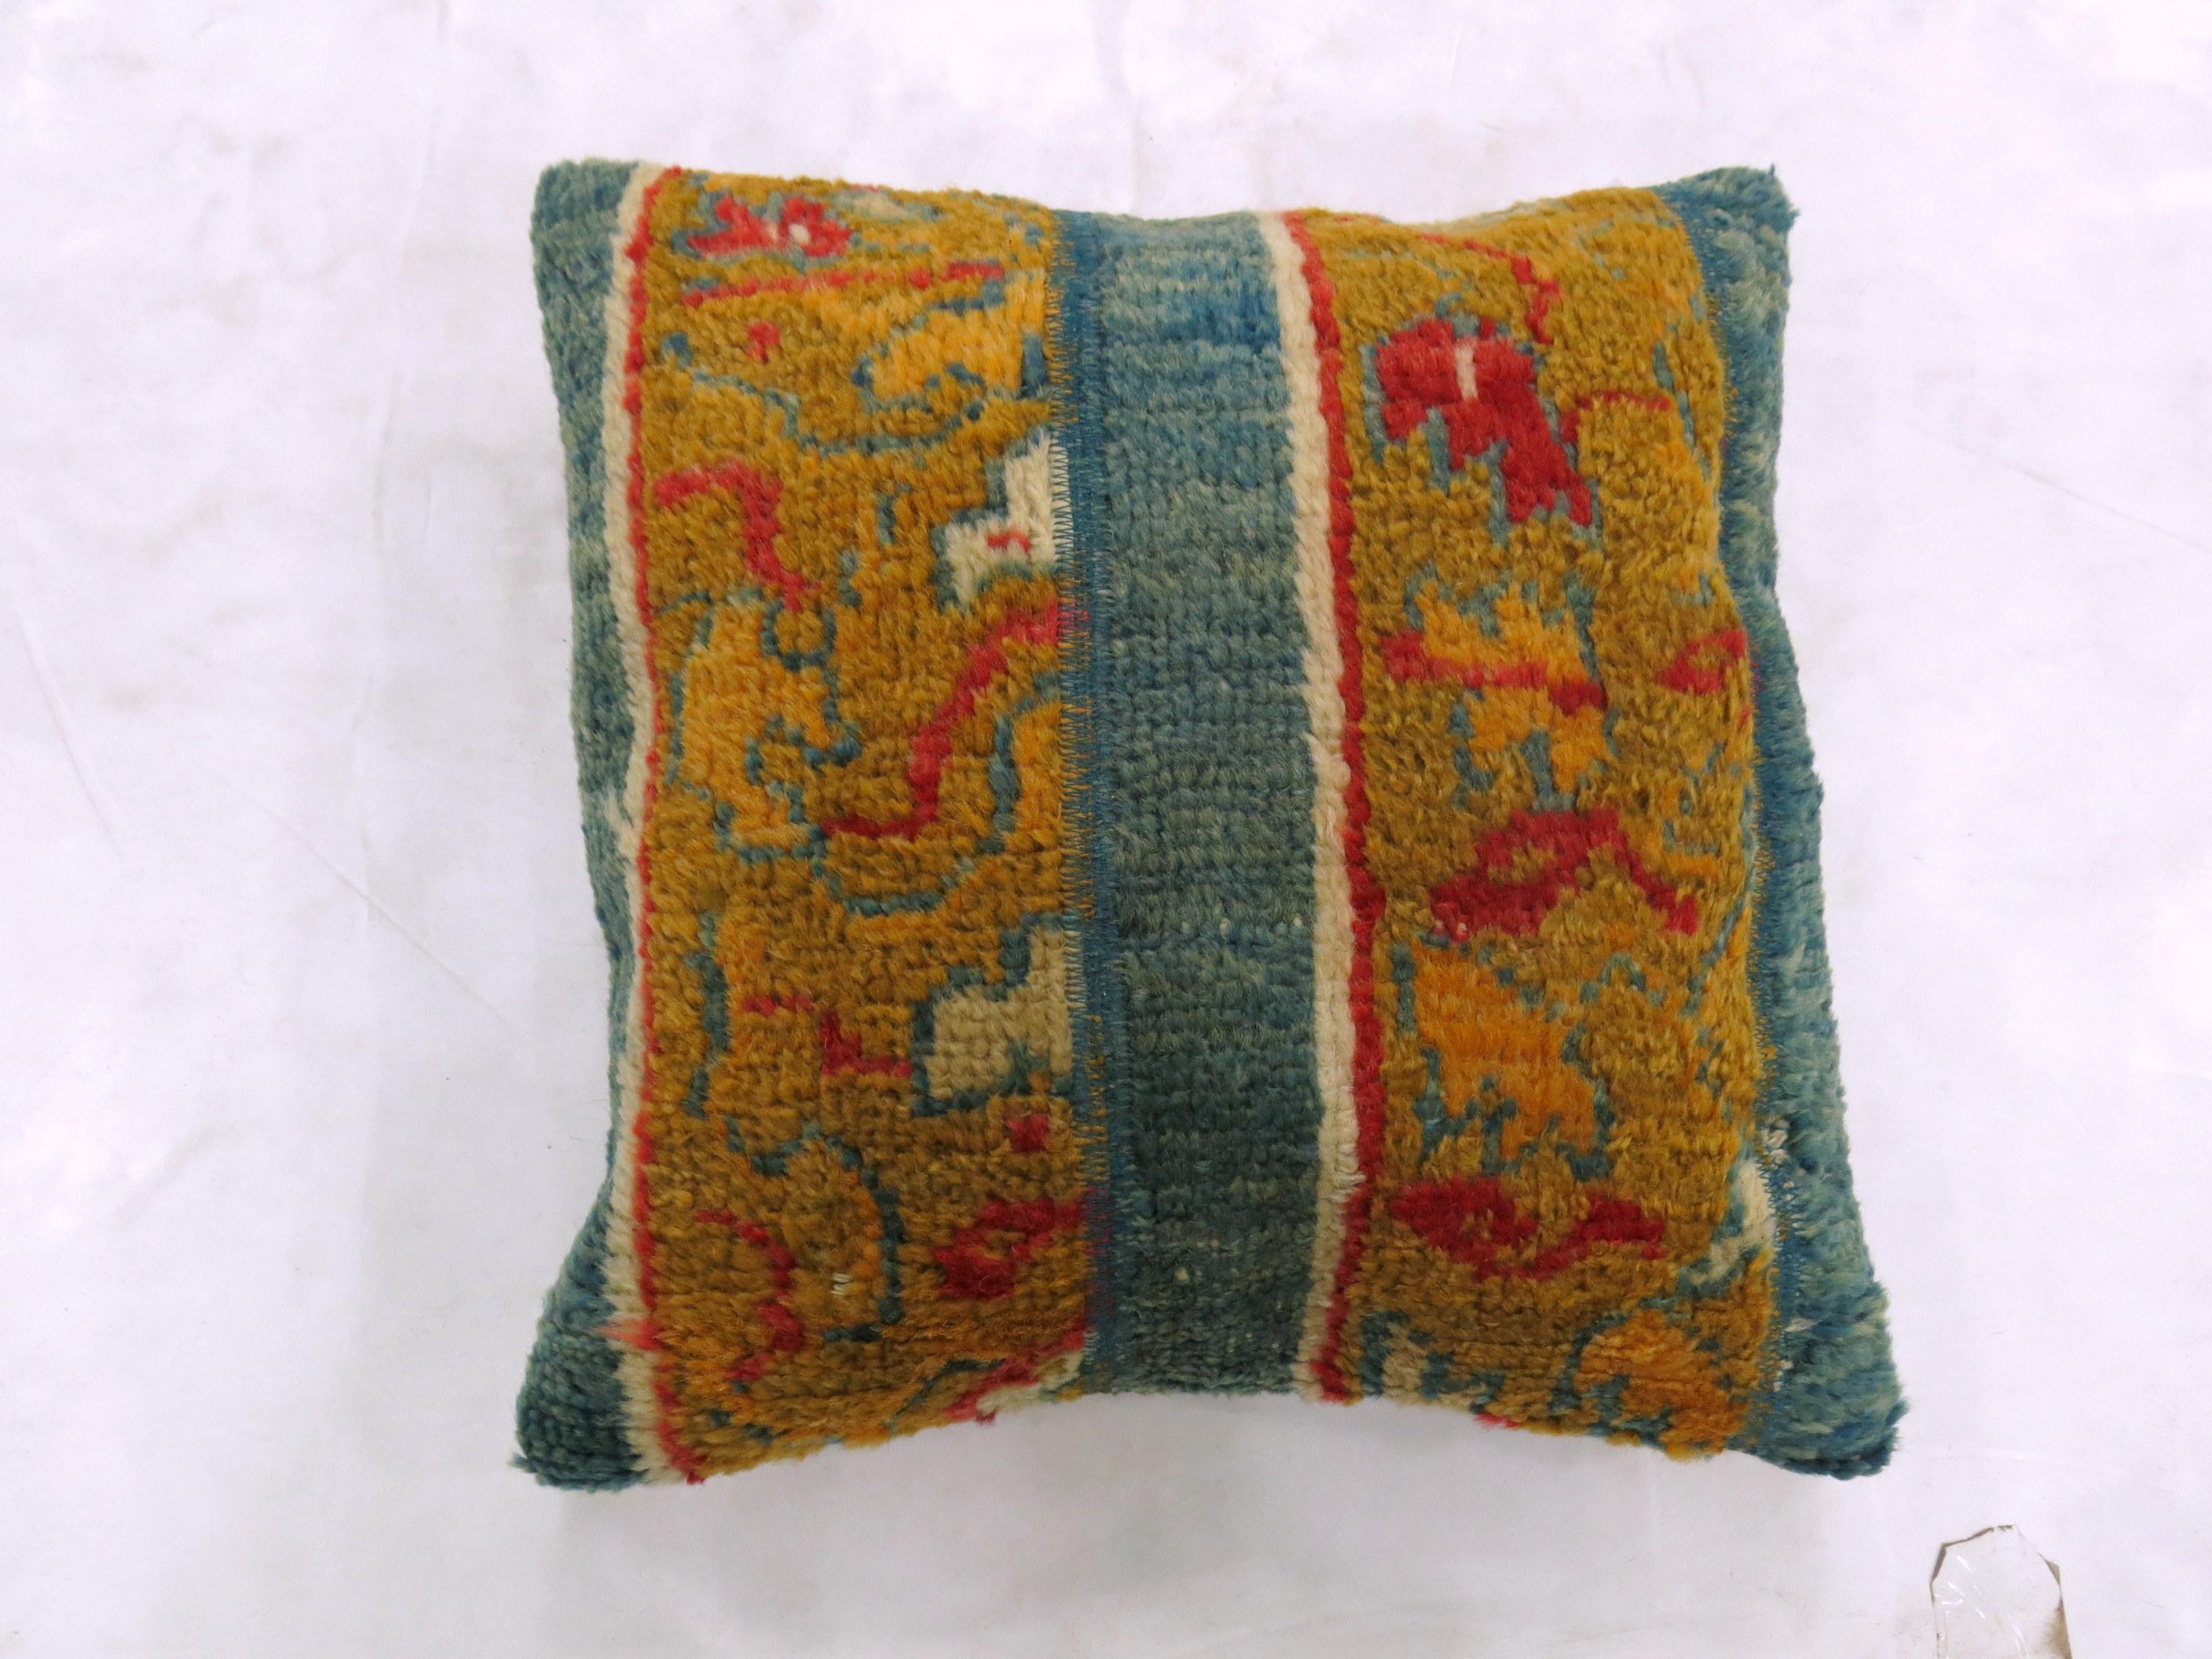 Pair of bright Turkish rug pillows measuring 17” x 17” and 17” x 18” respectively.